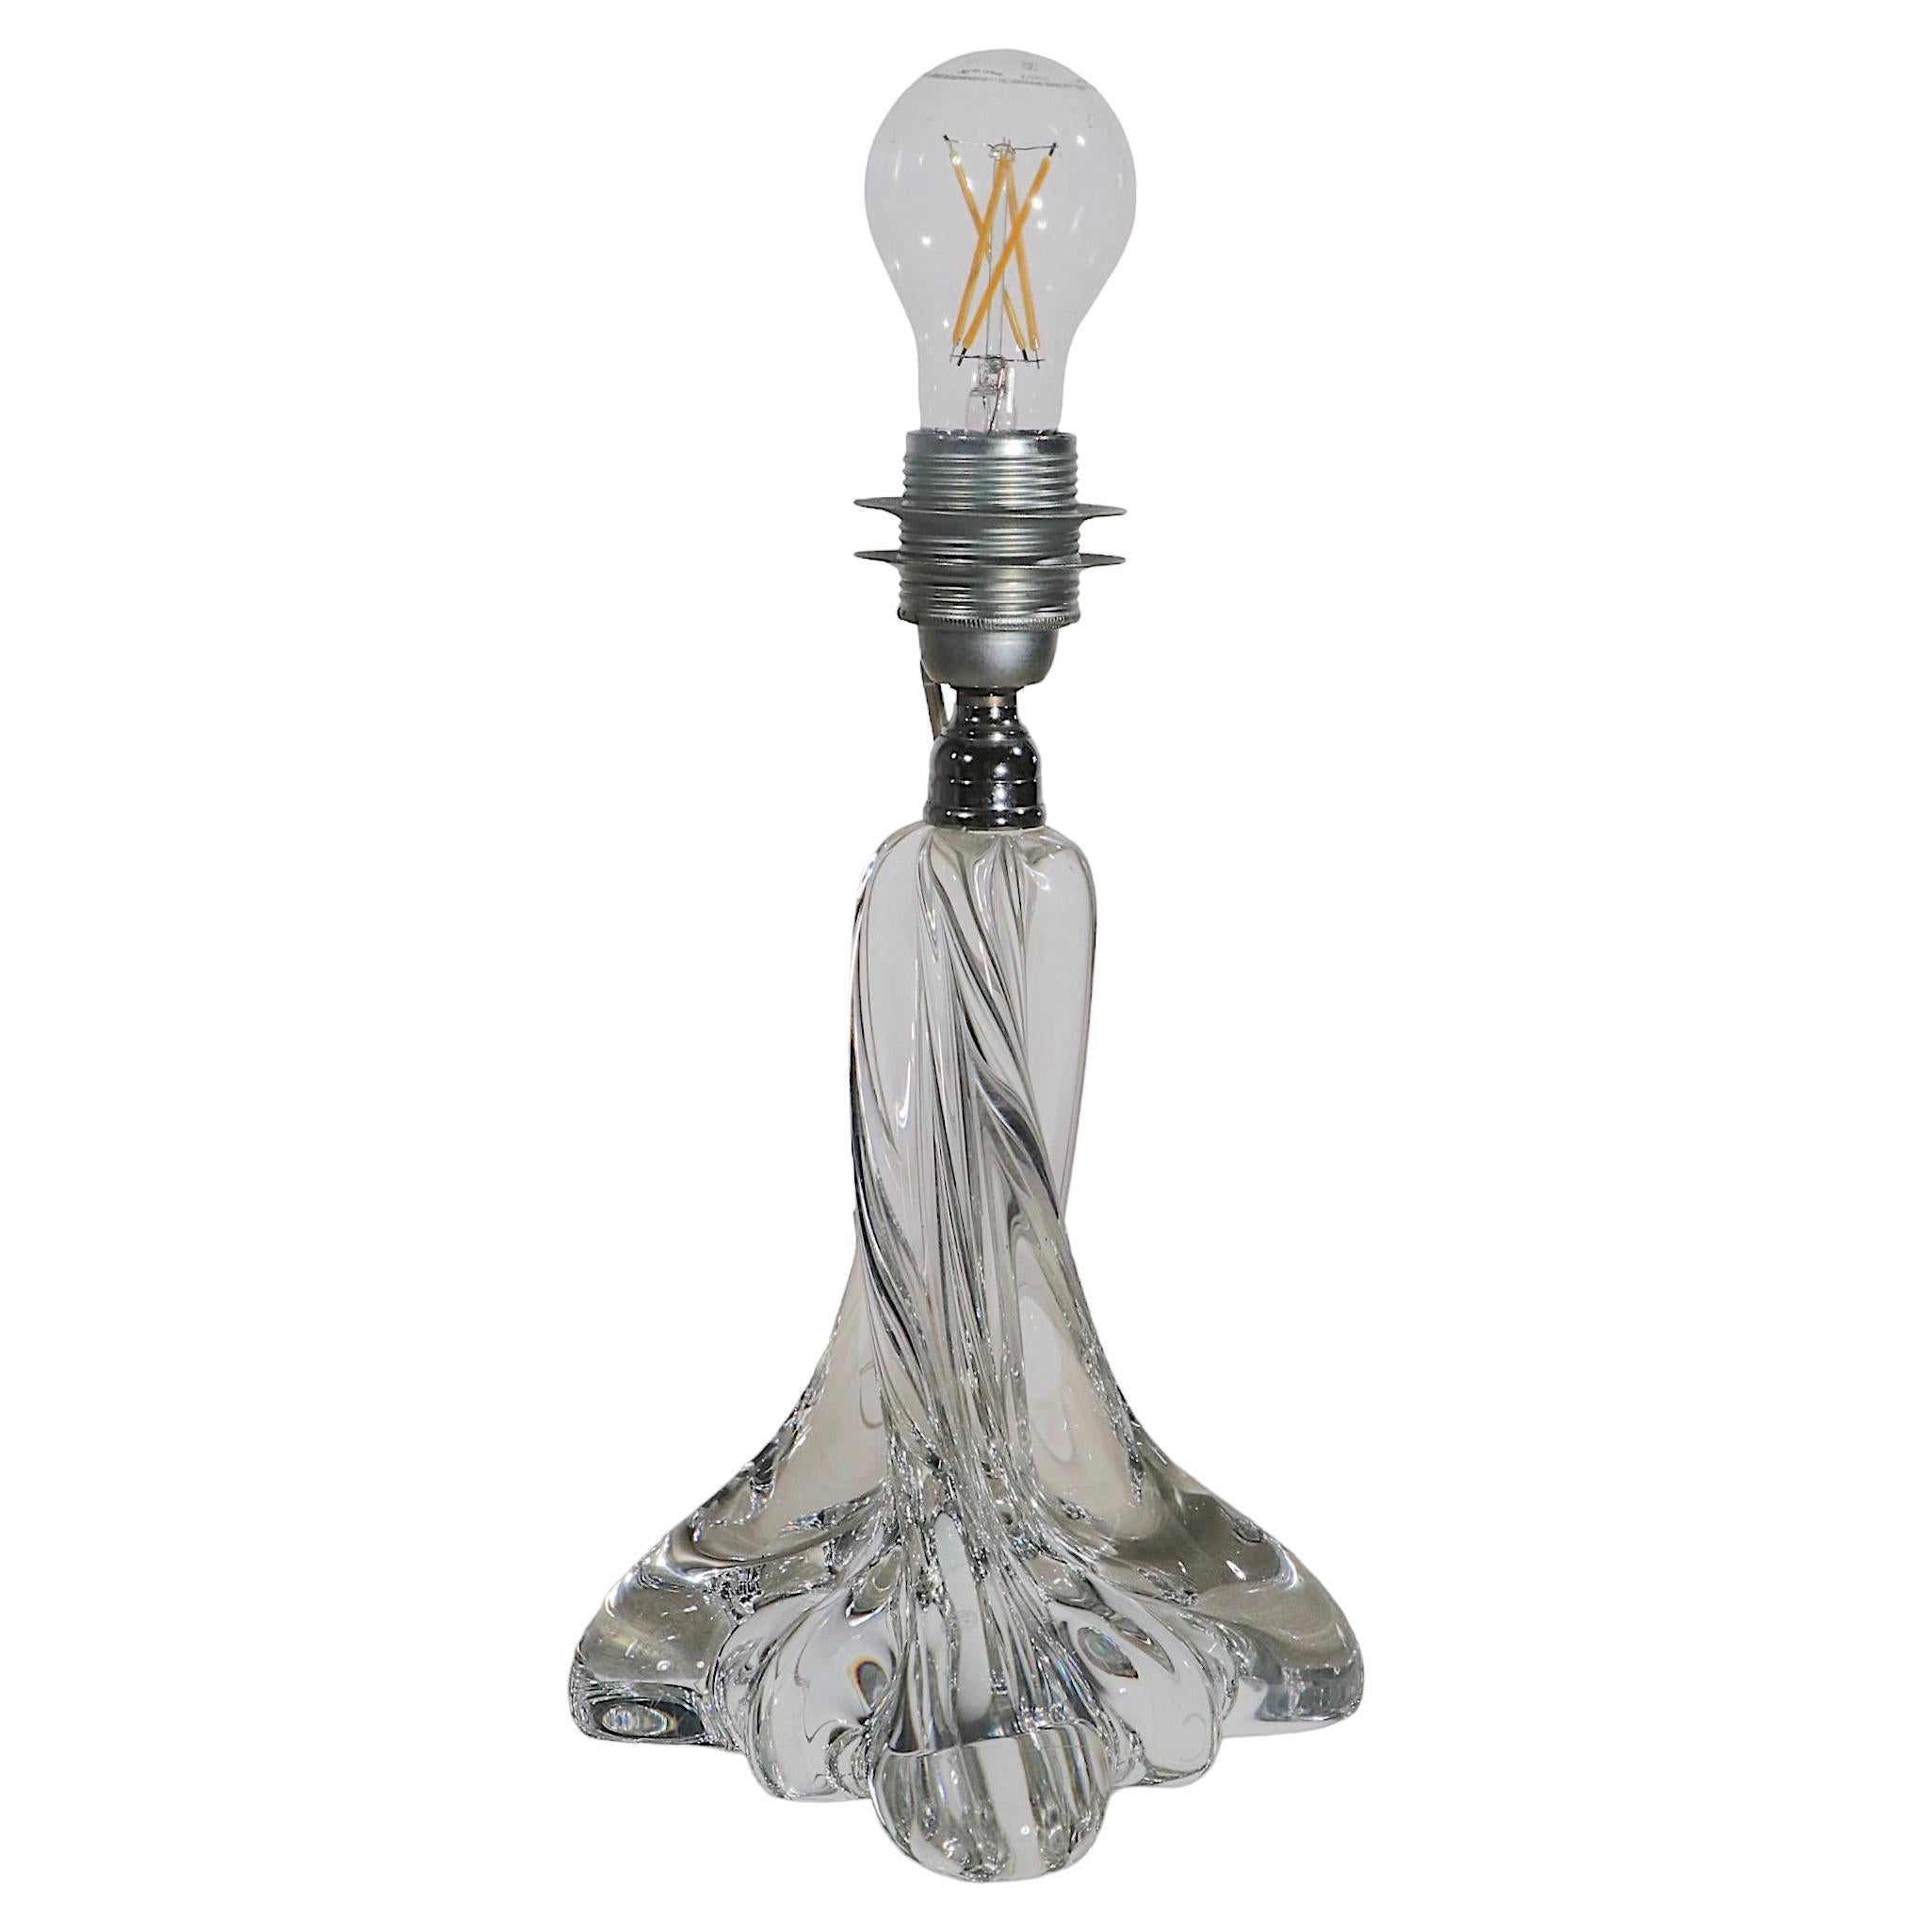 Crystal Twist Form Table Lamp Made in France by Baccarat